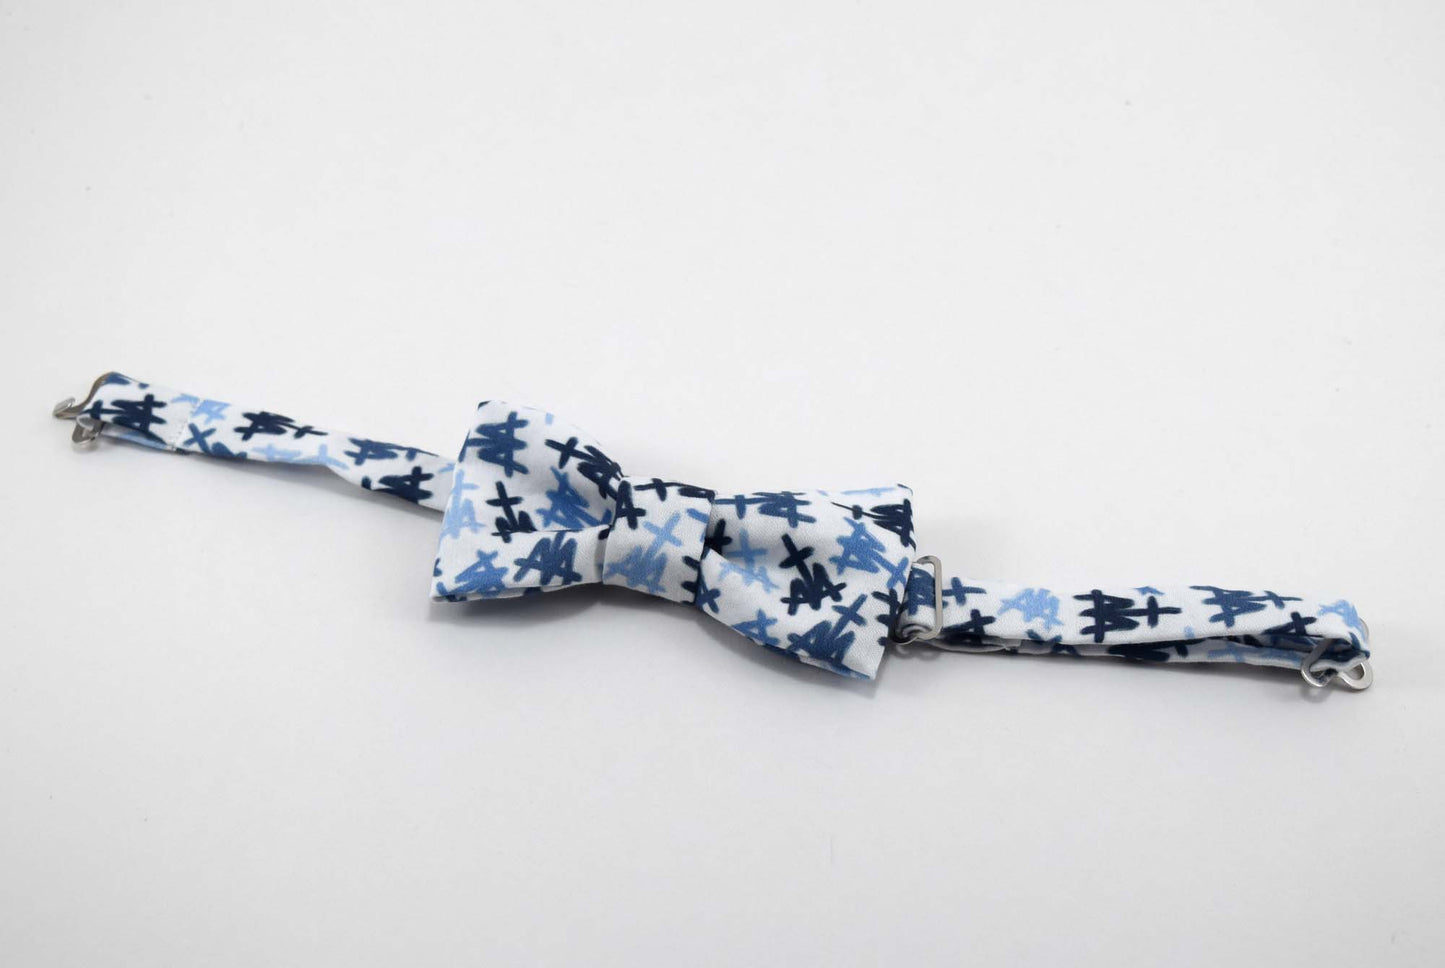 Adjustable Youth Marian Bow Tie